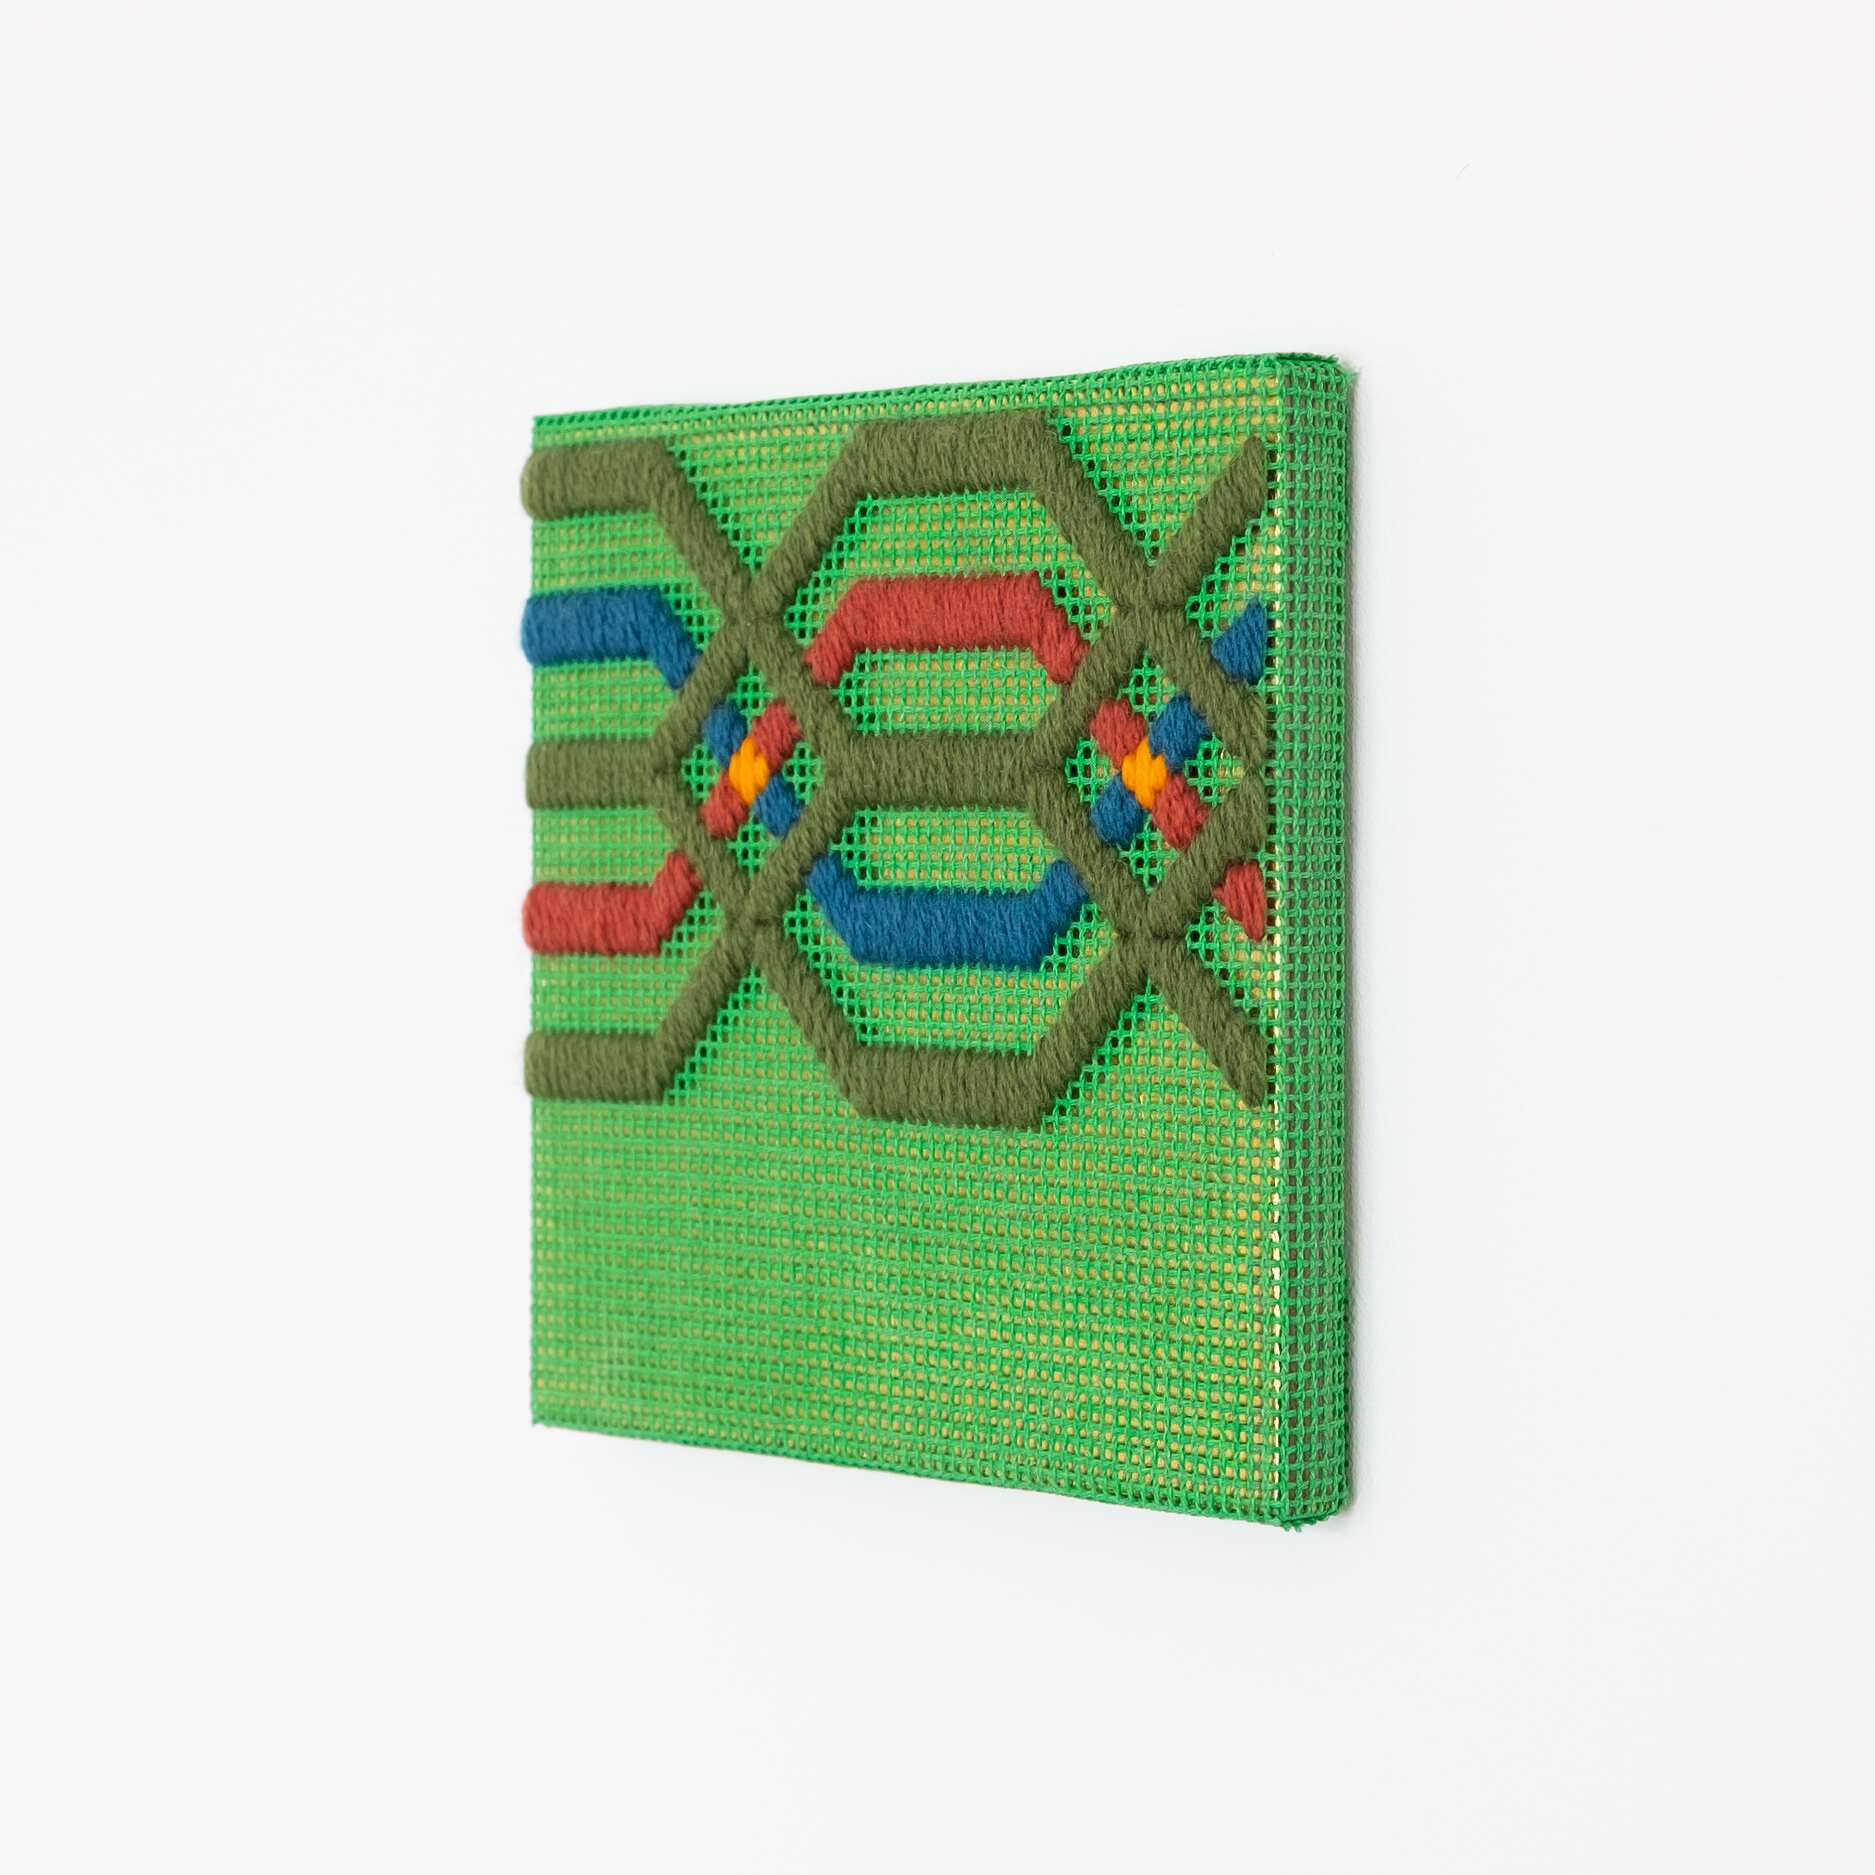 Border fragment [olive-red-blue on green], Hand-embroidered wool thread and acrylic paint on canvas over gilded panel, 2021